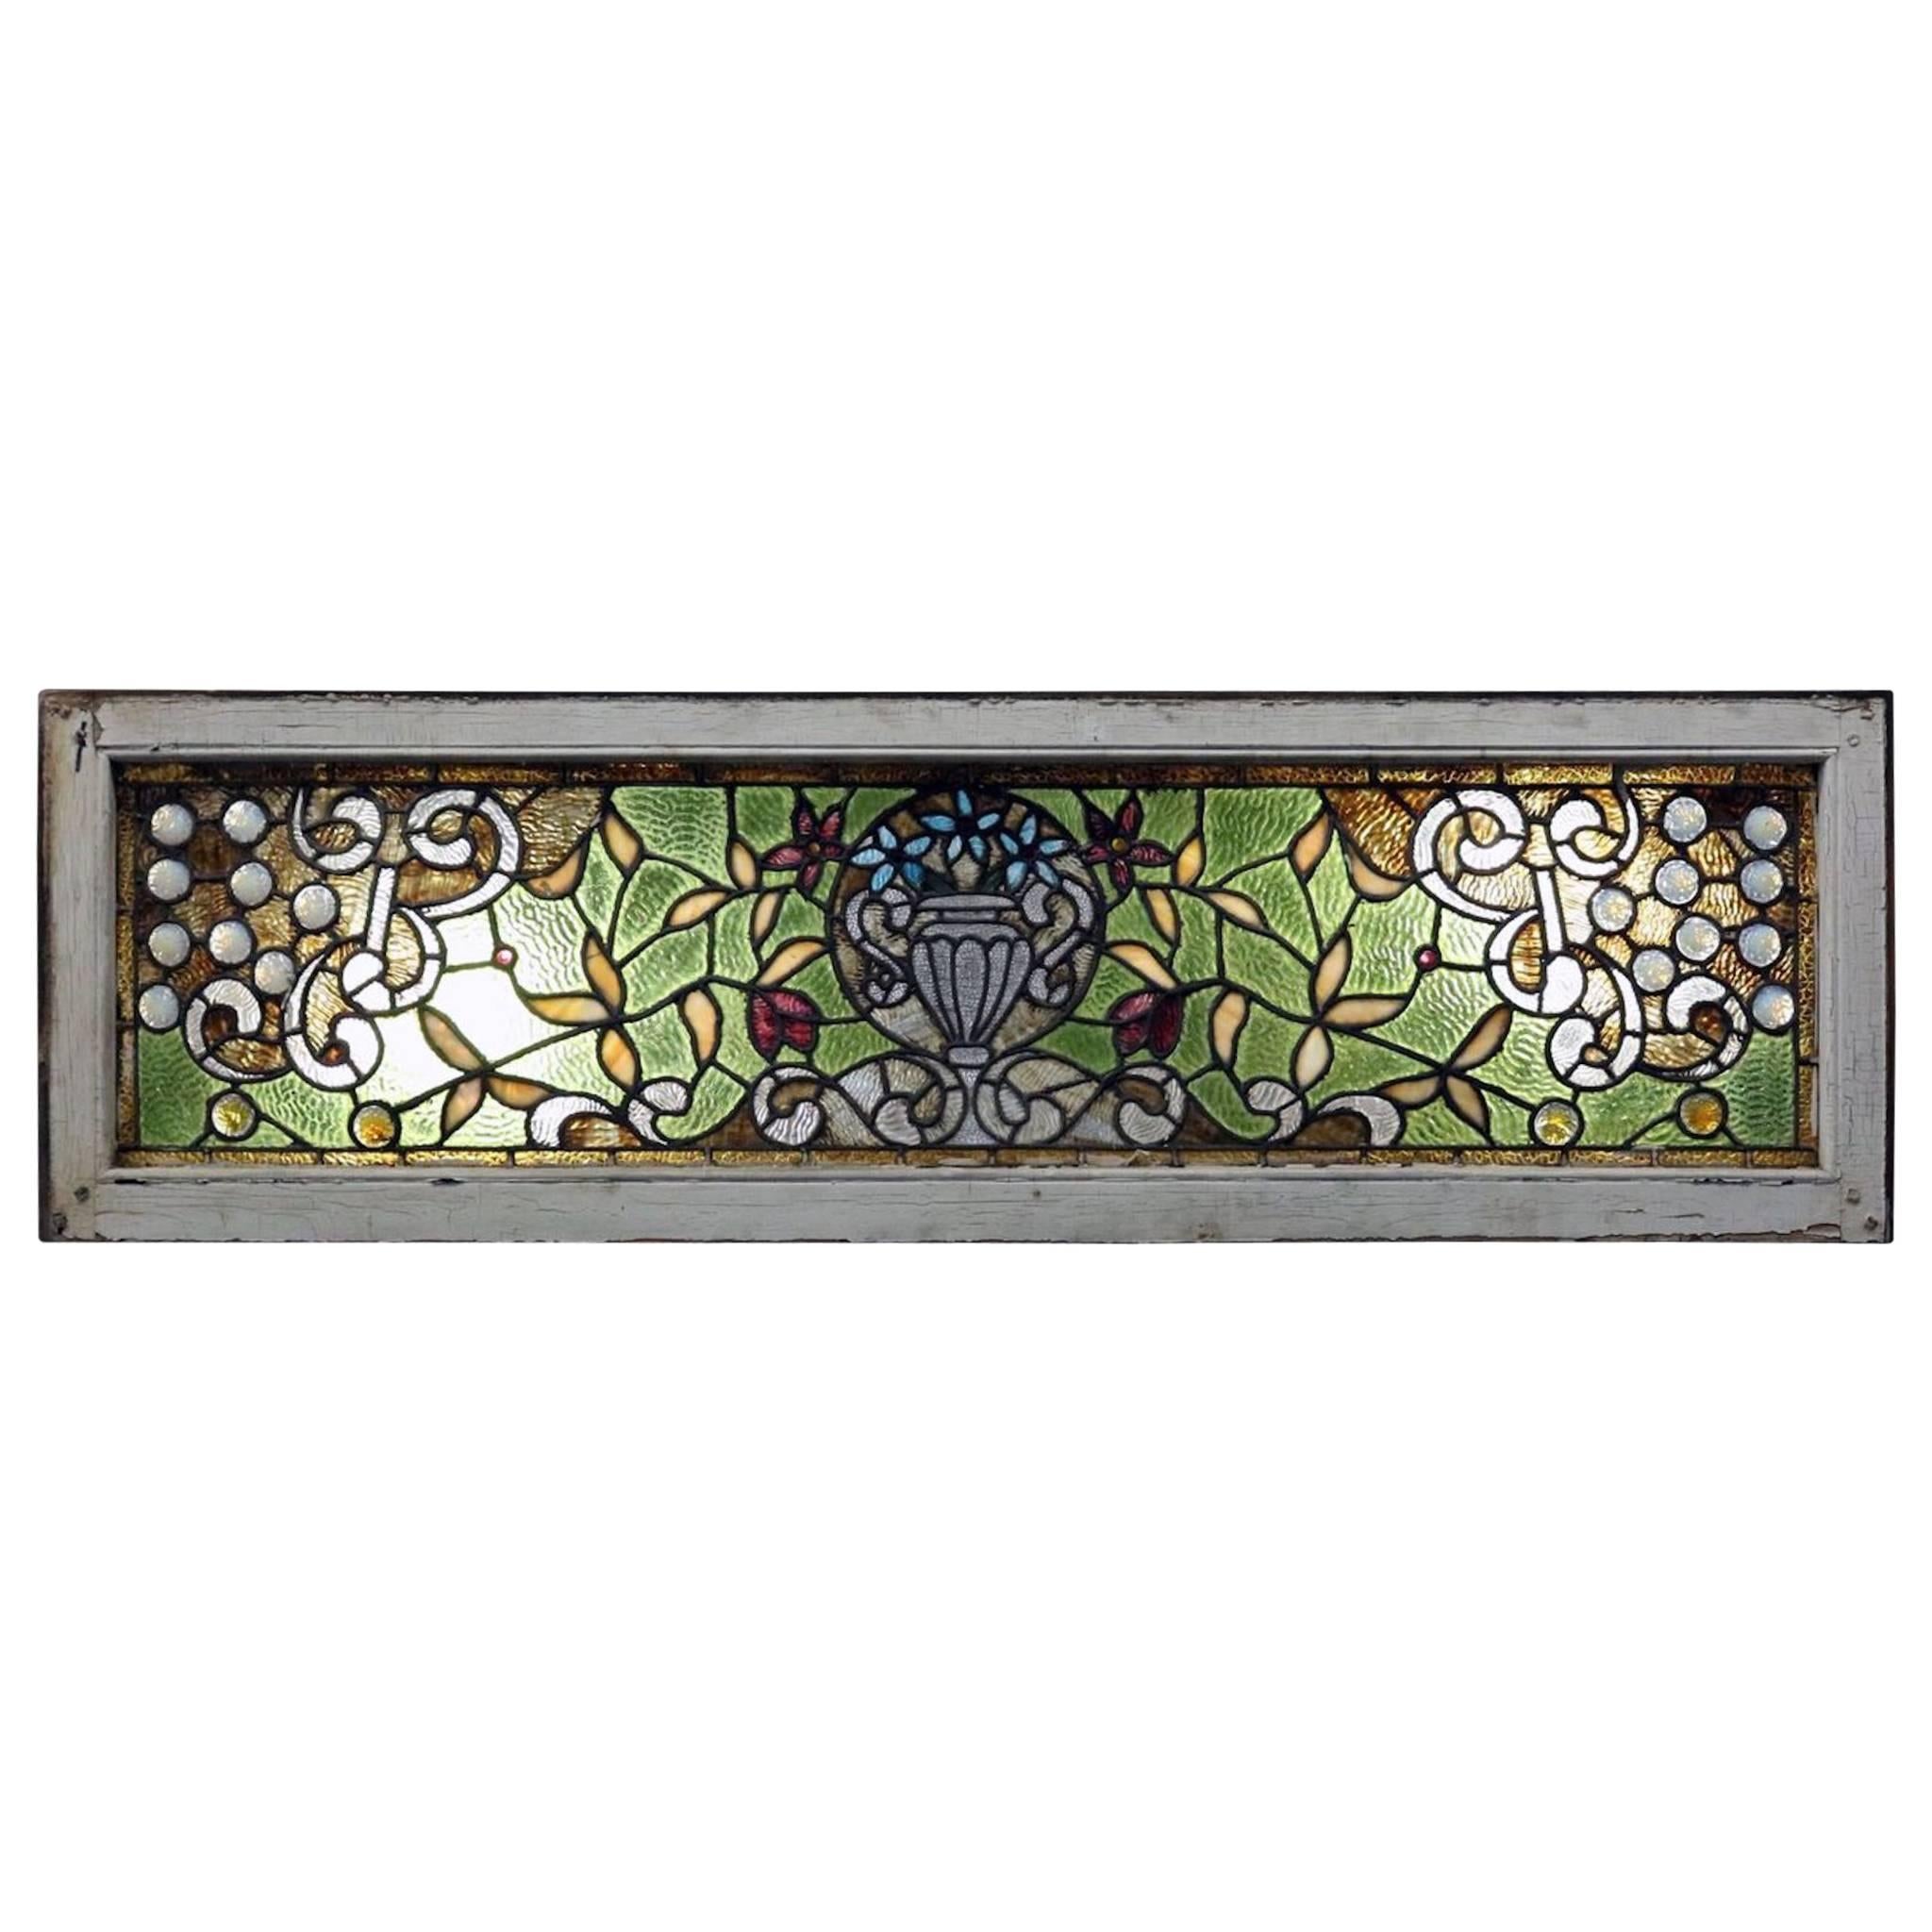 Antique Chunk Jeweled Tiffany LaFarge Style Window with Floral Urn Design